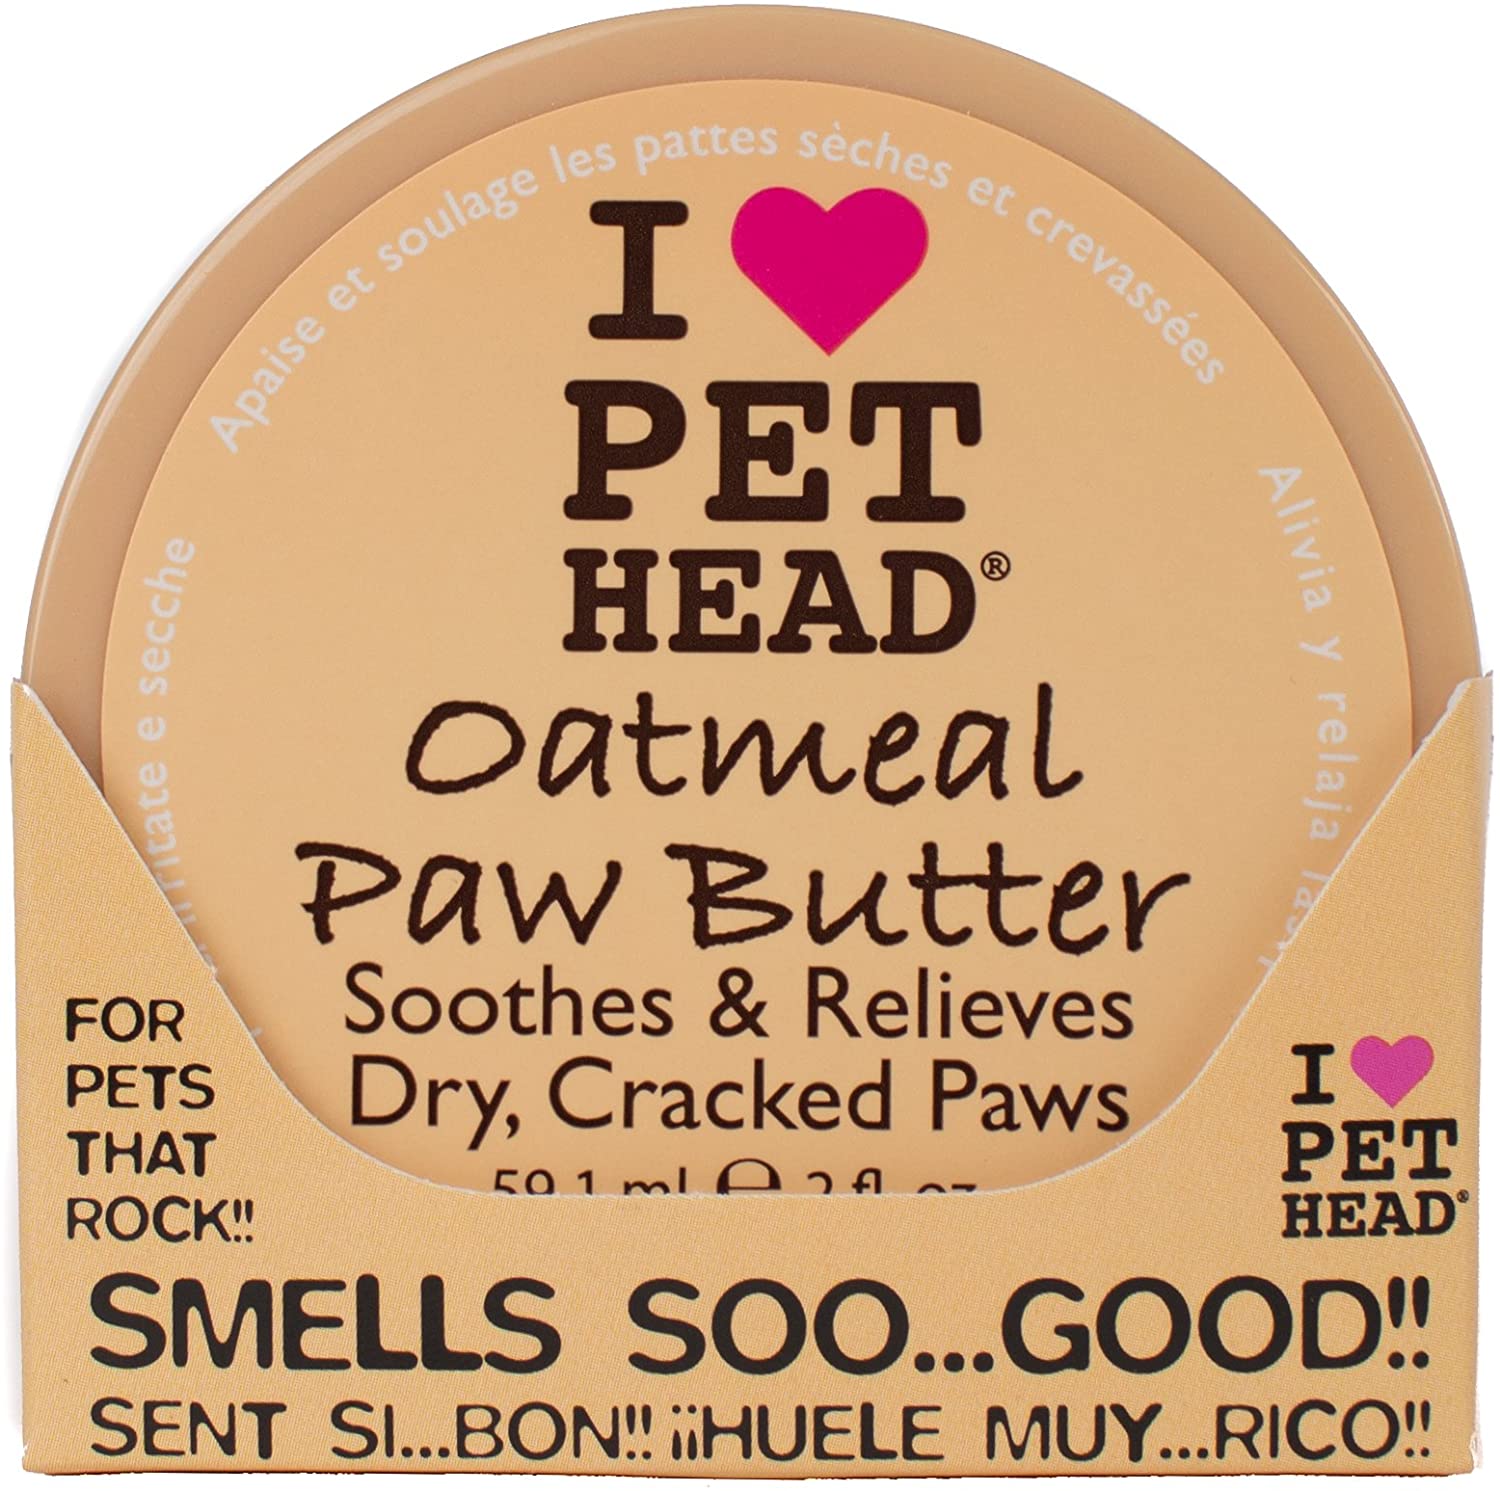  Oatmeal Paw Butter 